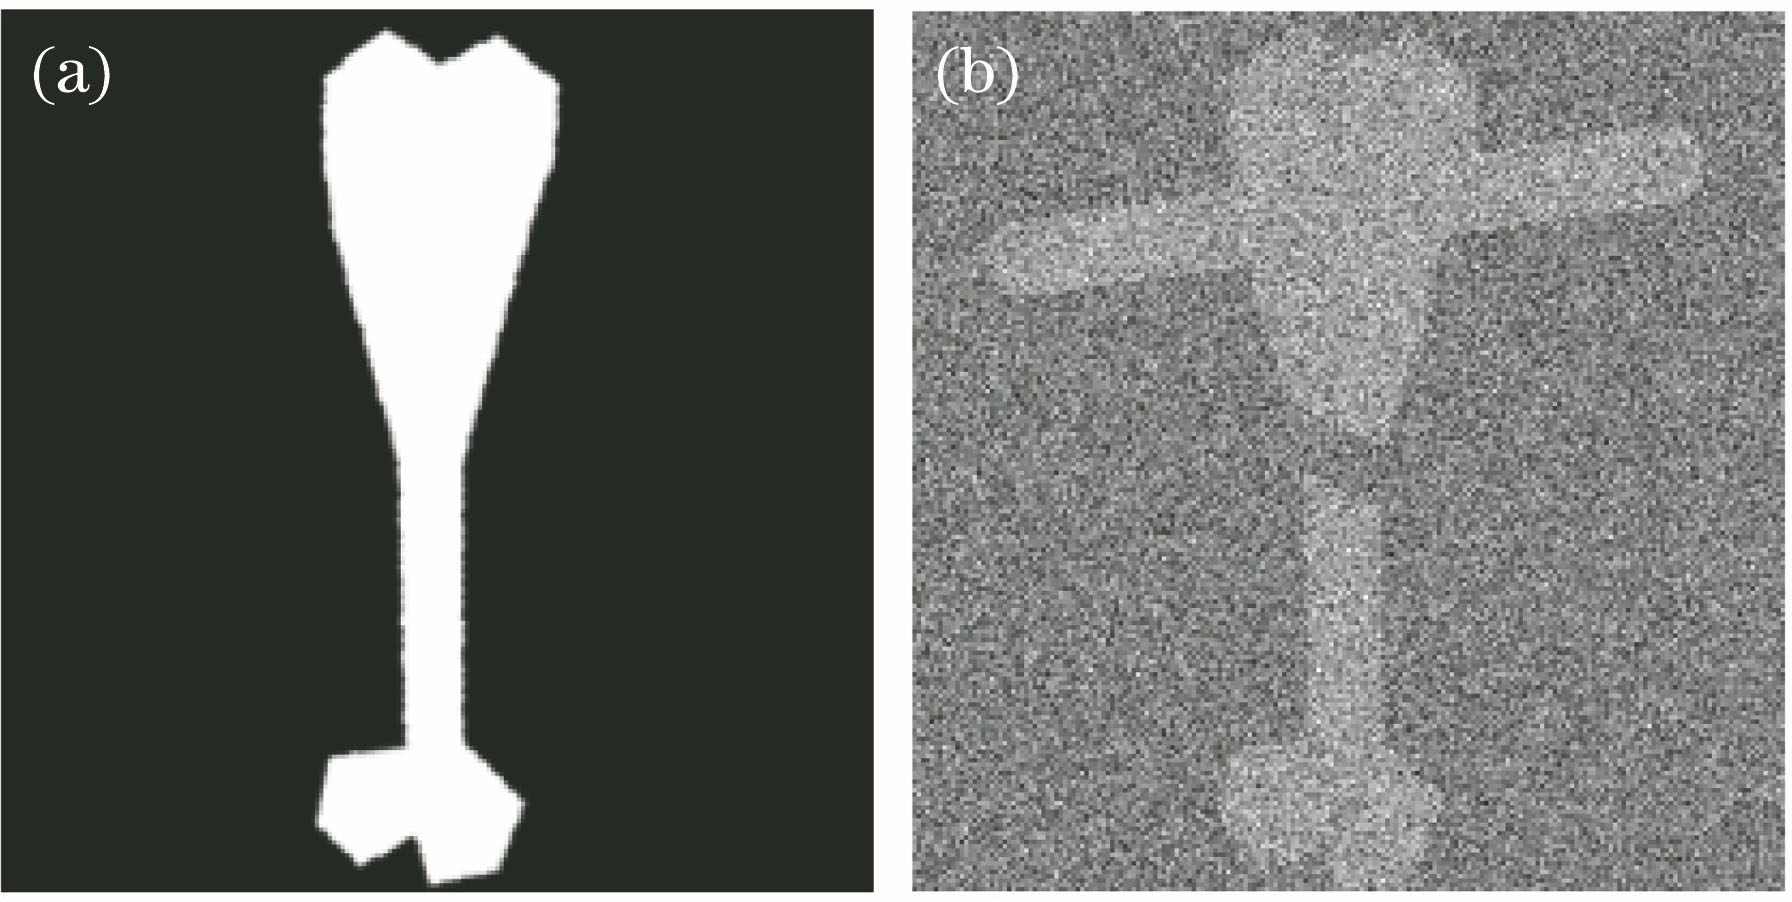 Original figure of bone. (a) Normalized original figure; (b) figure with Gaussian white noise and occlusion